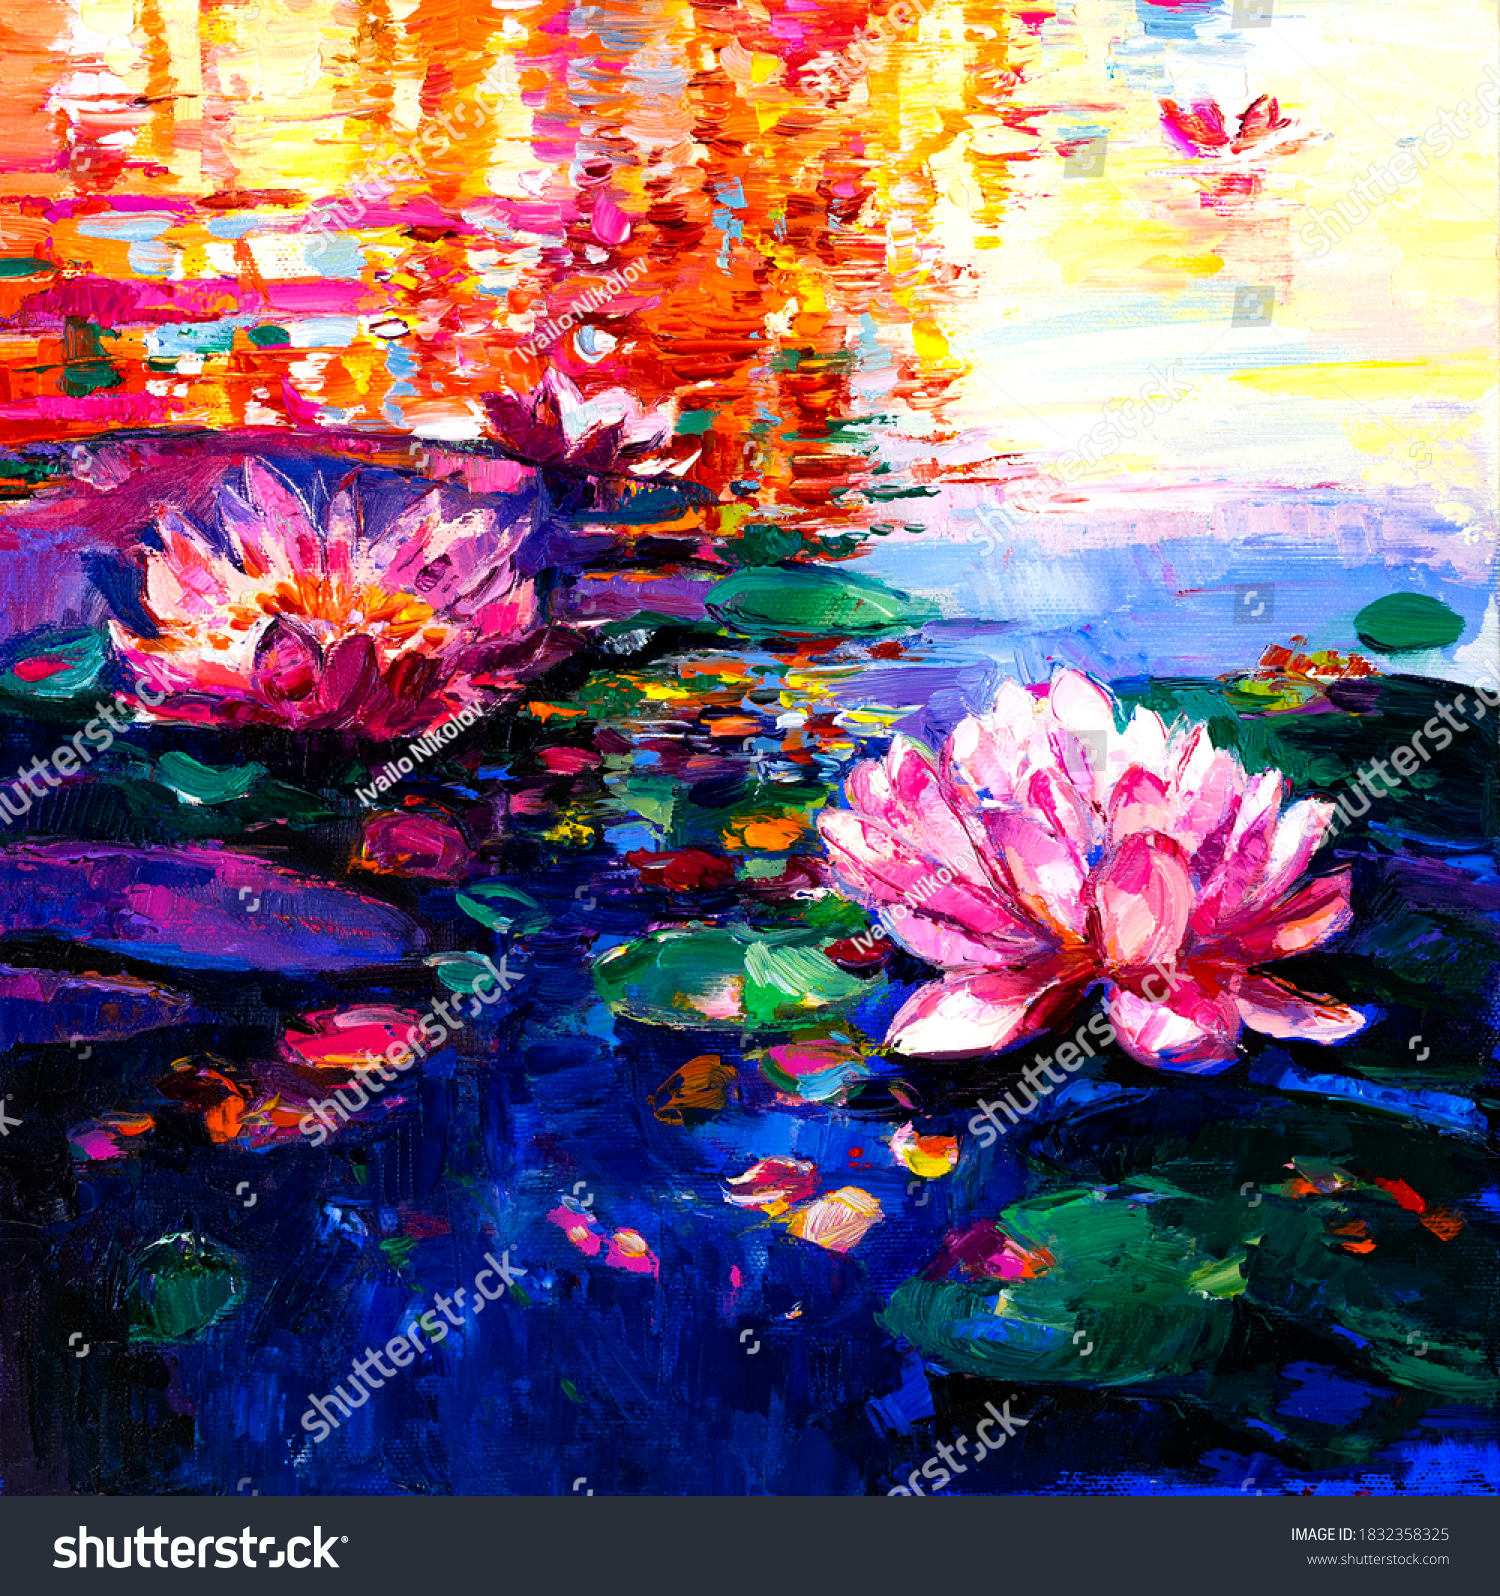 1,925,711 Beautiful Painting Images, Stock Photos & Vectors ...